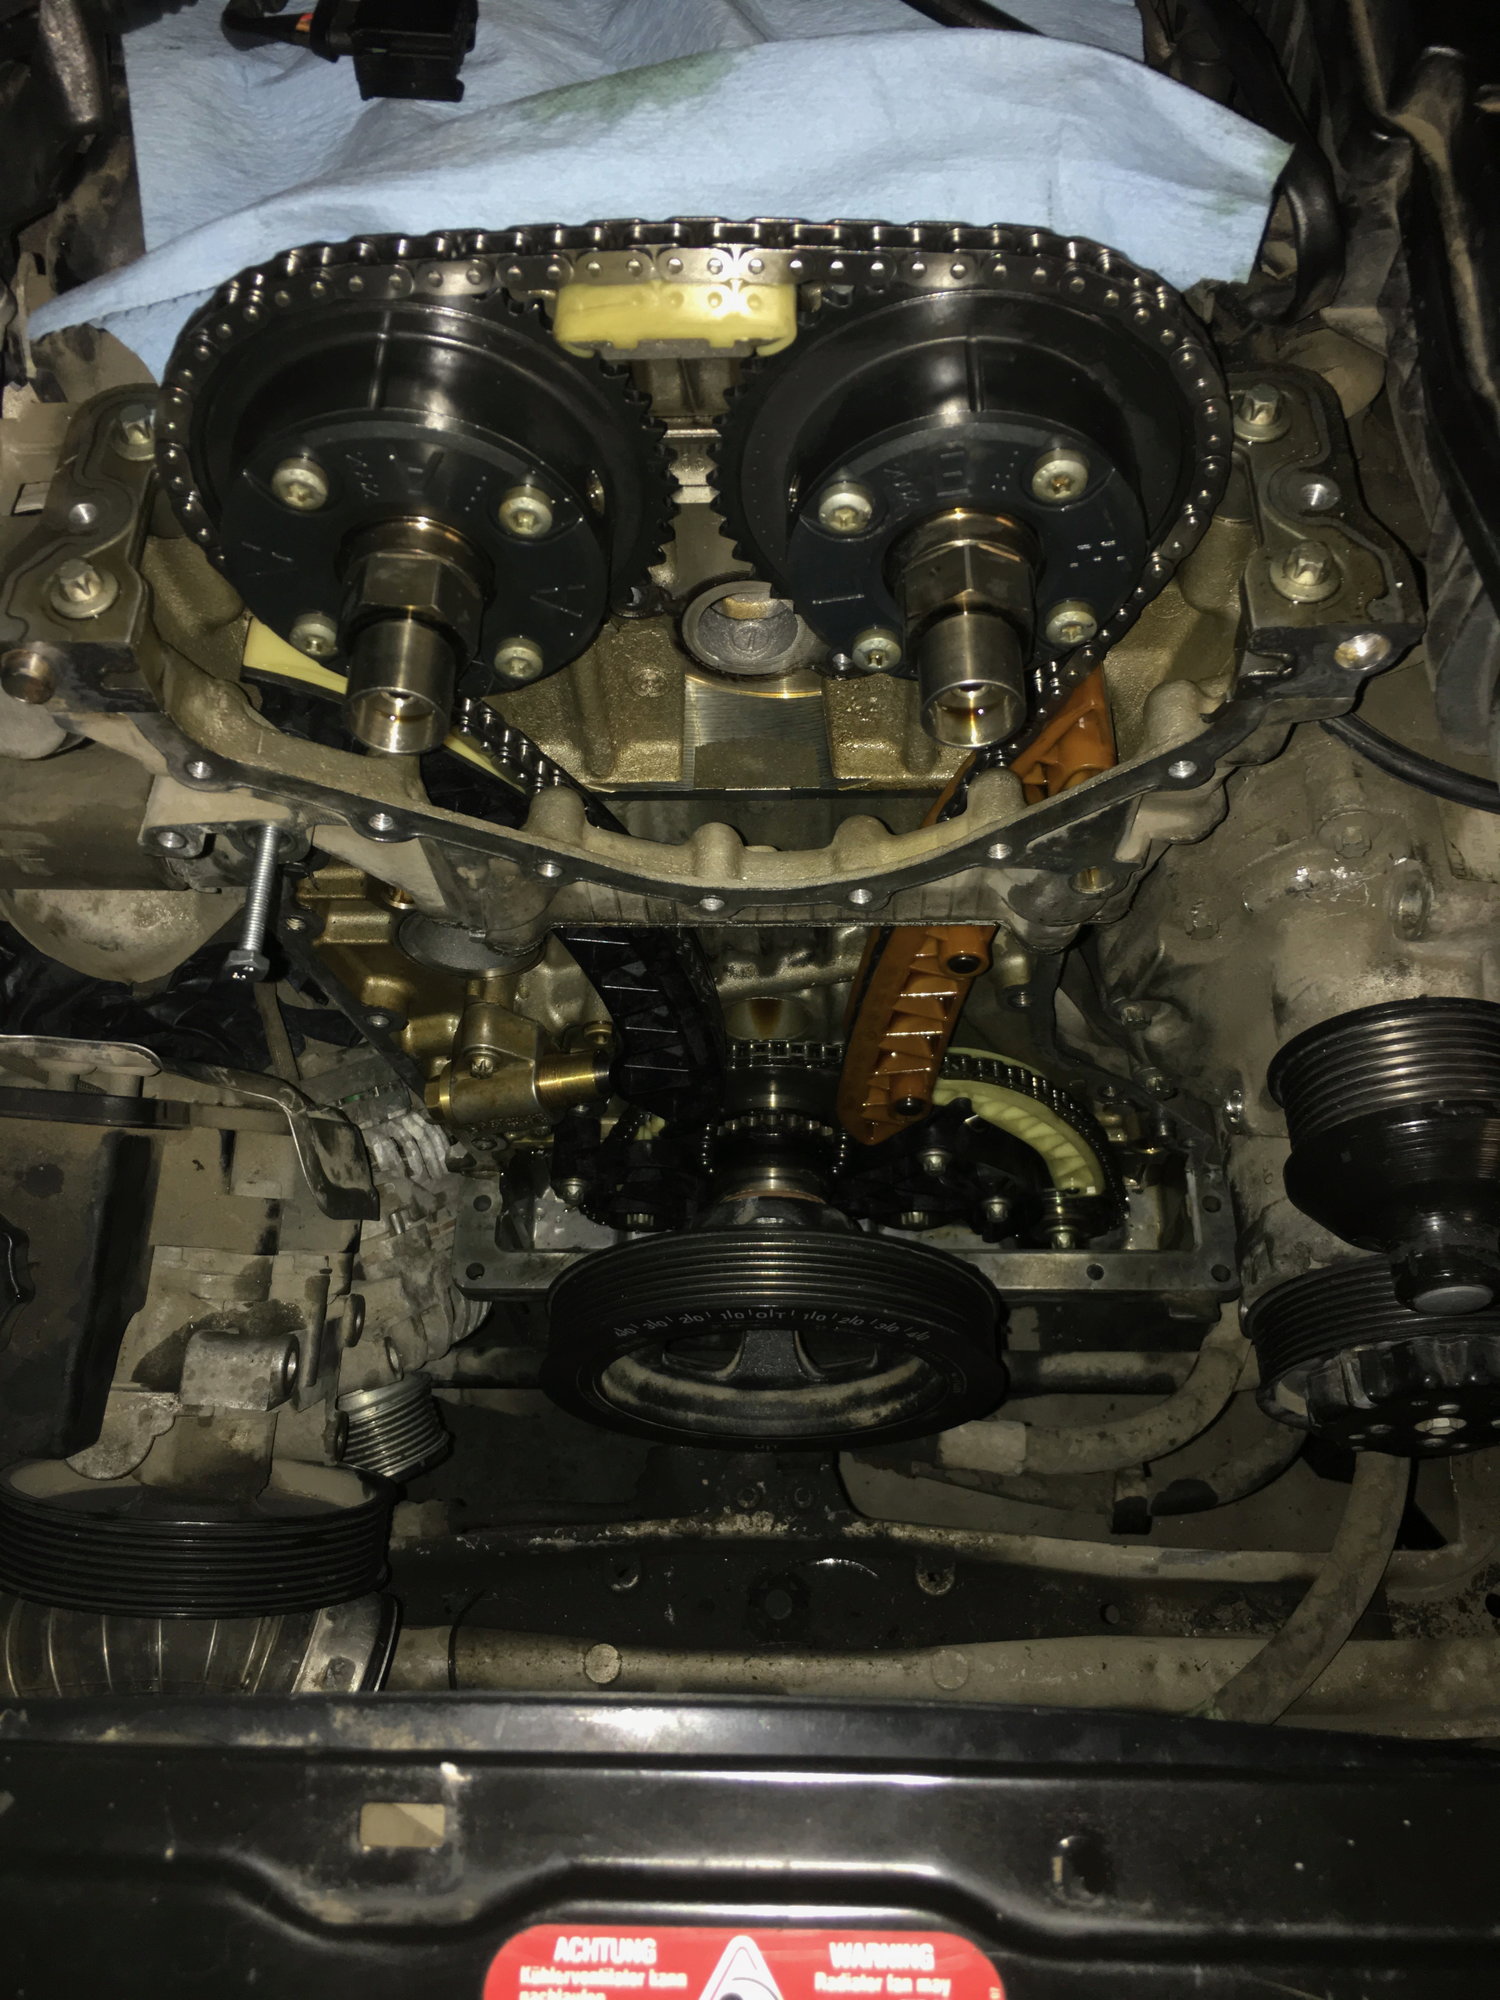 A painful experience of c230 timing chain - MBWorld.org Forums